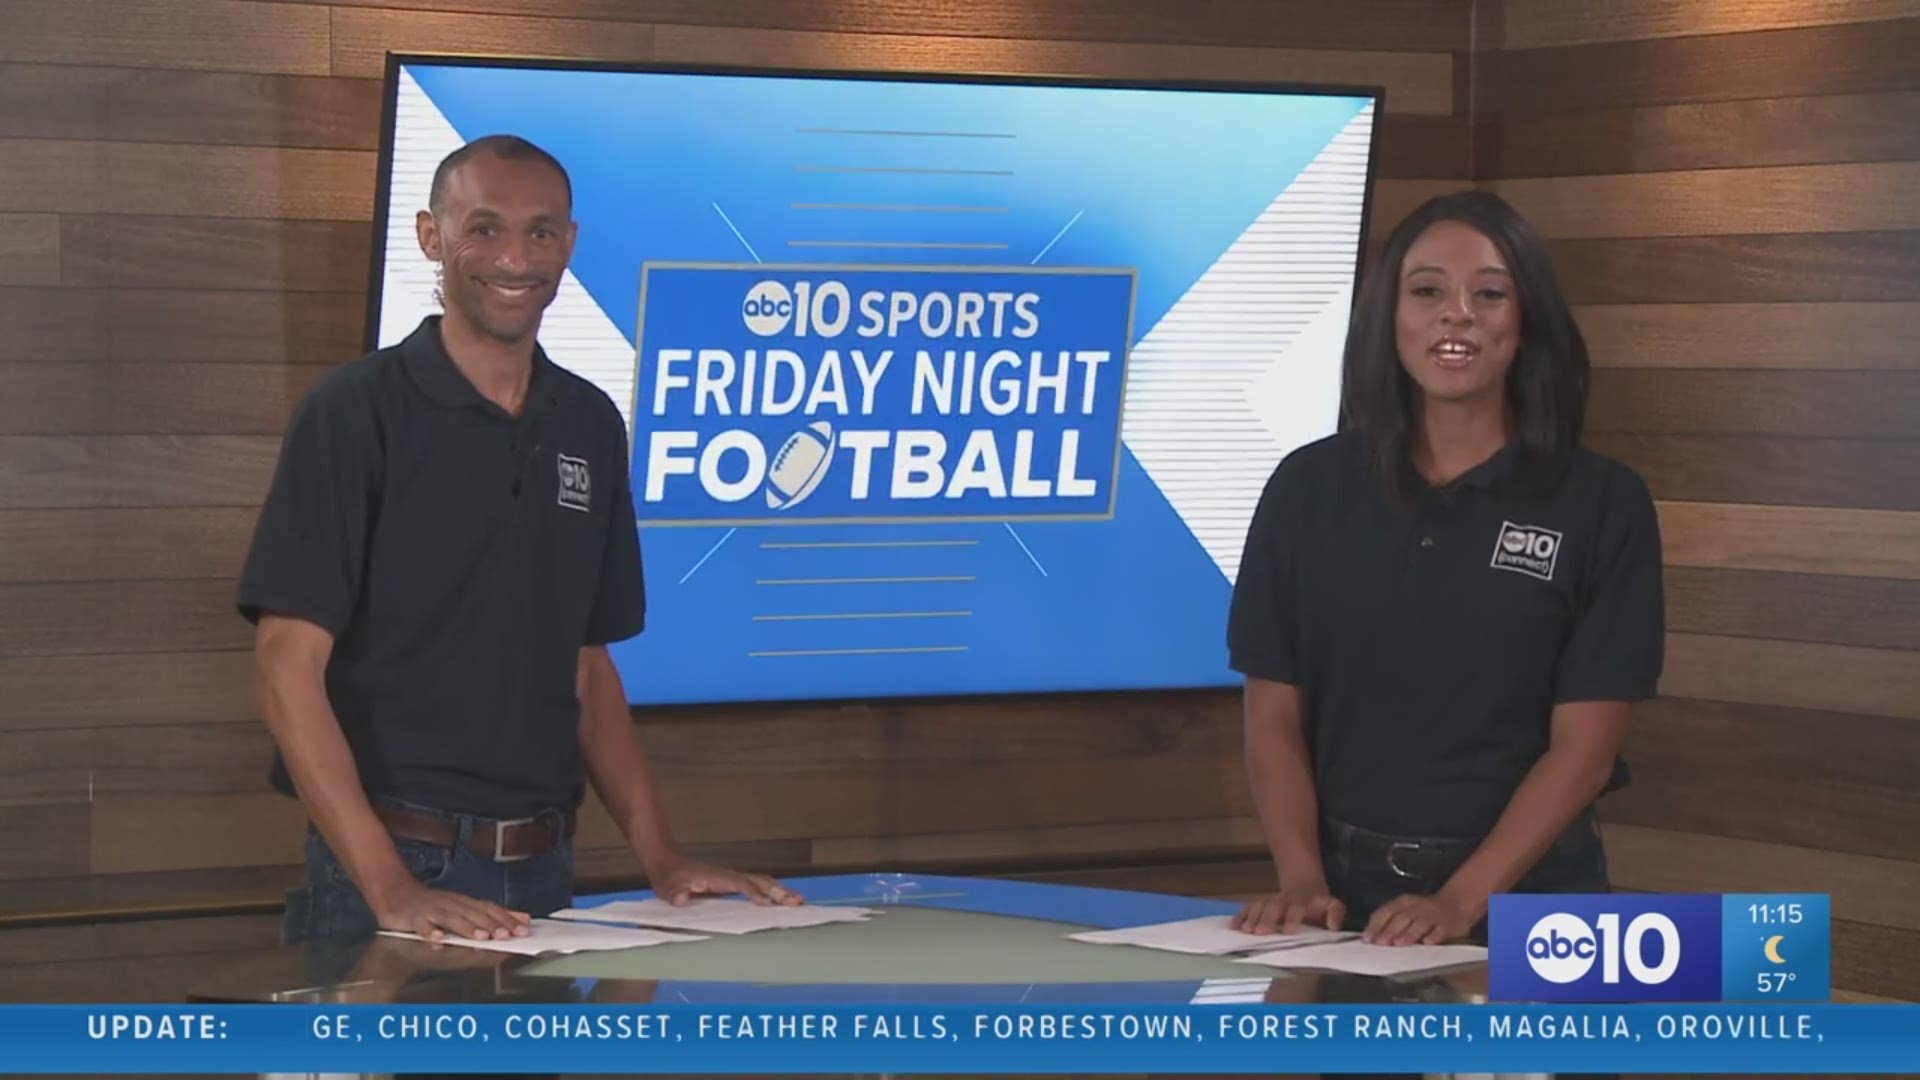 ABC10's Lina Washington and Kevin John bring you Week 6 highlights from the biggest games in the Sacramento-Stockton region.